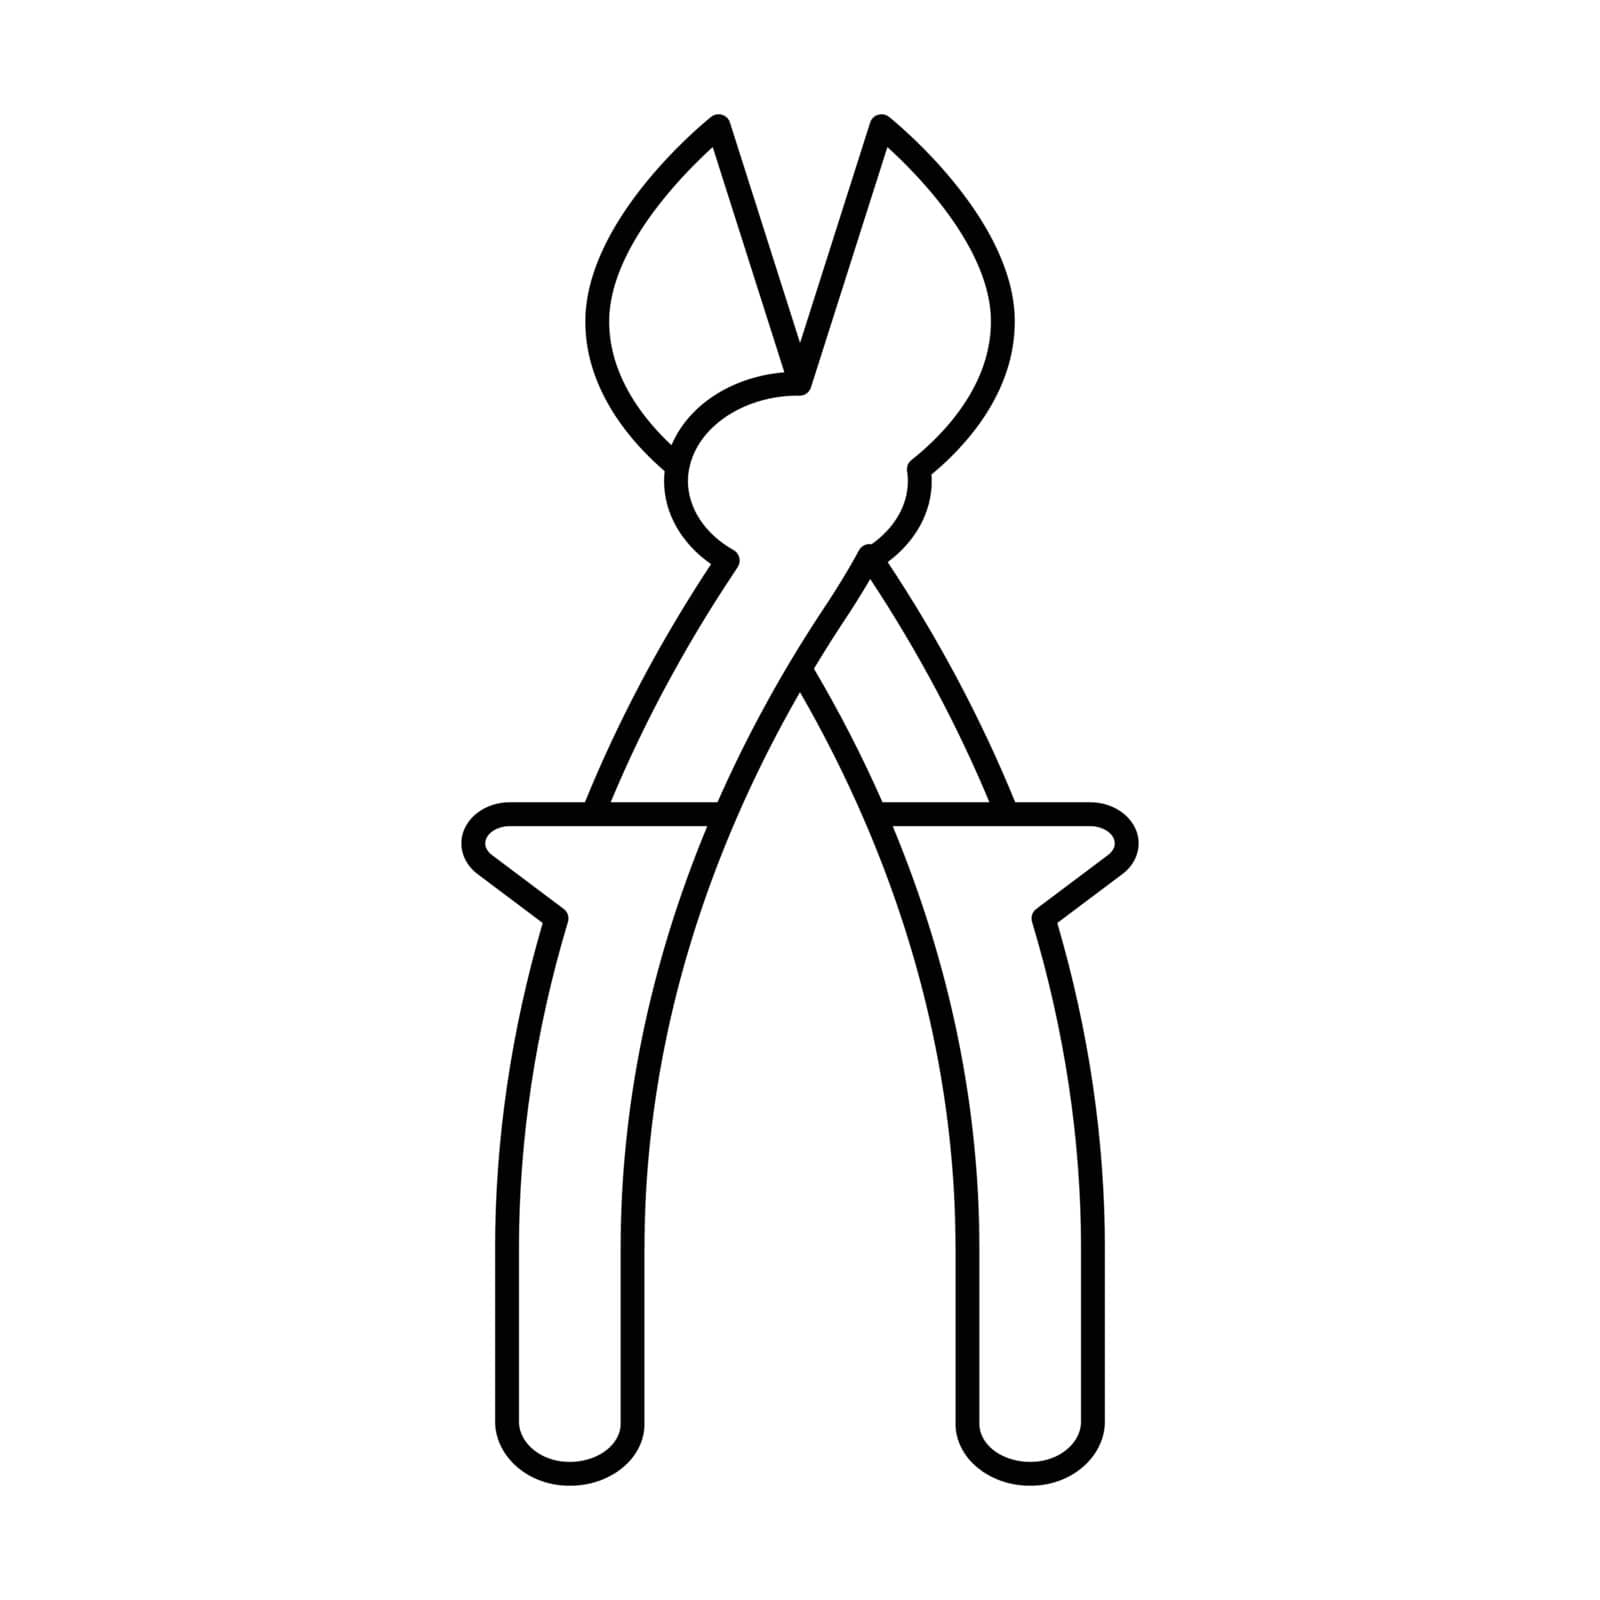 Thin line pliers icon by ang_bay